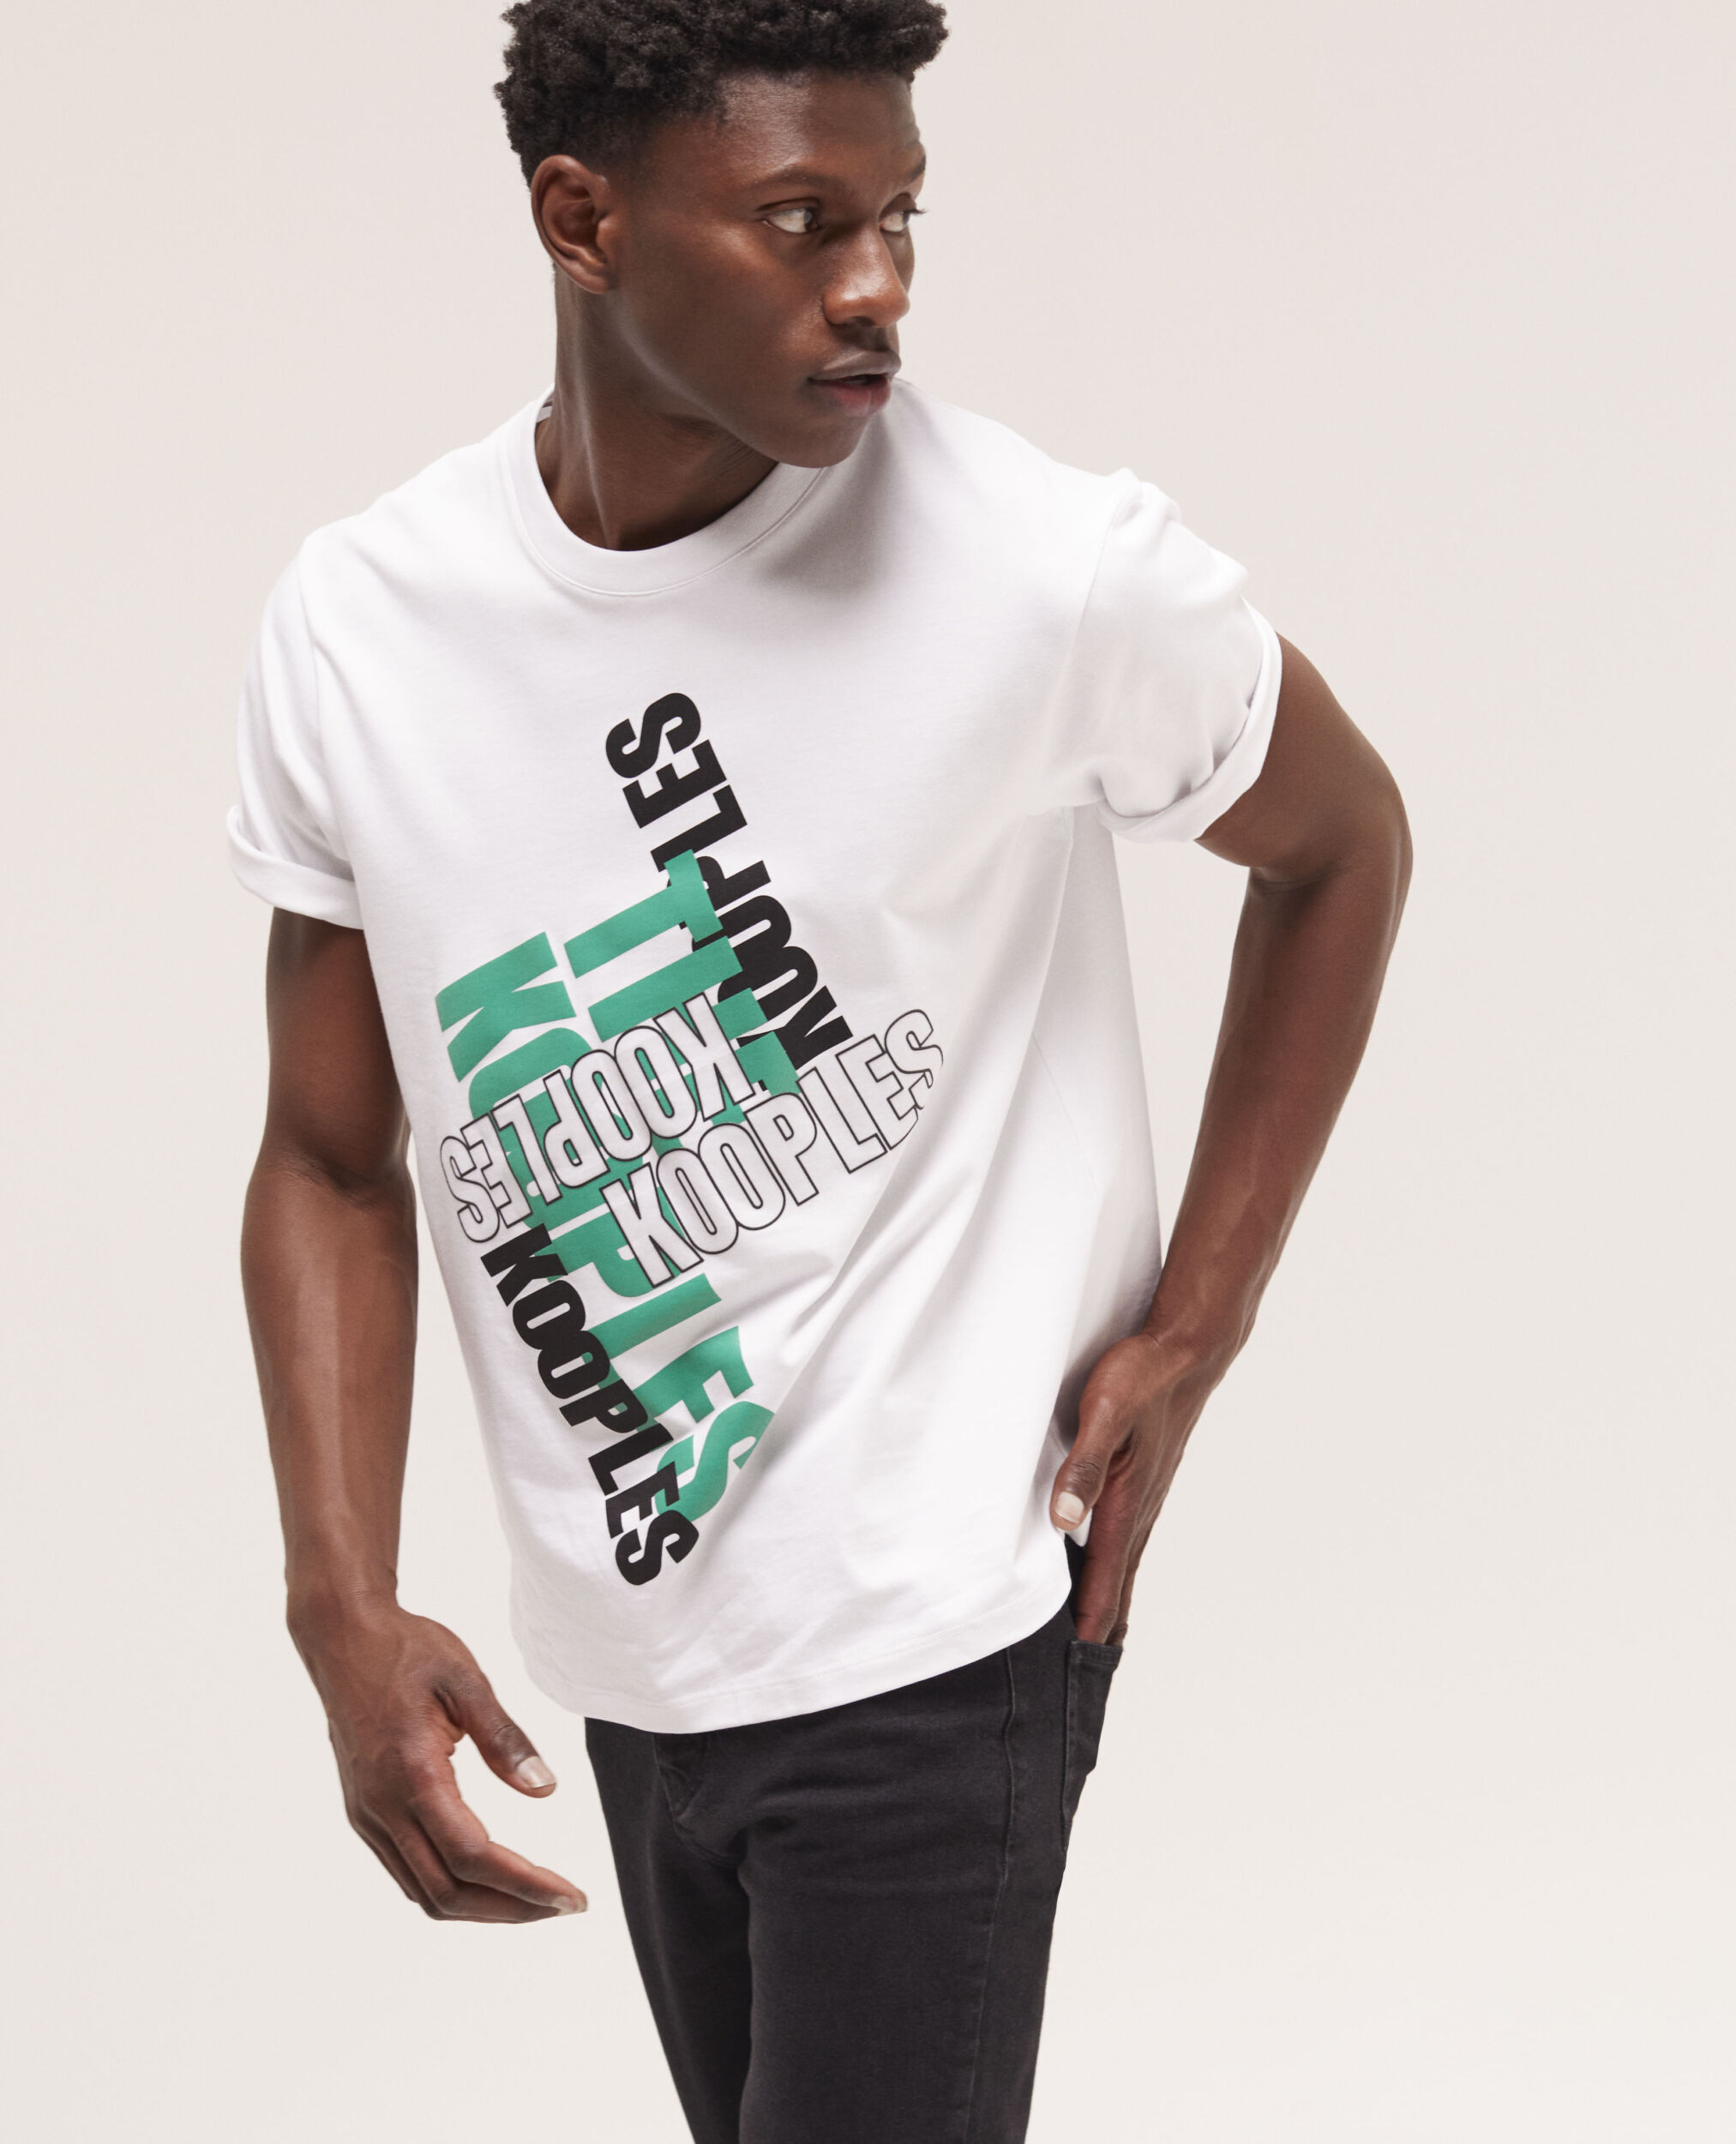 T-shirt Homme logo The Kooples blanc, GREEN-WHITE, hi-res image number null